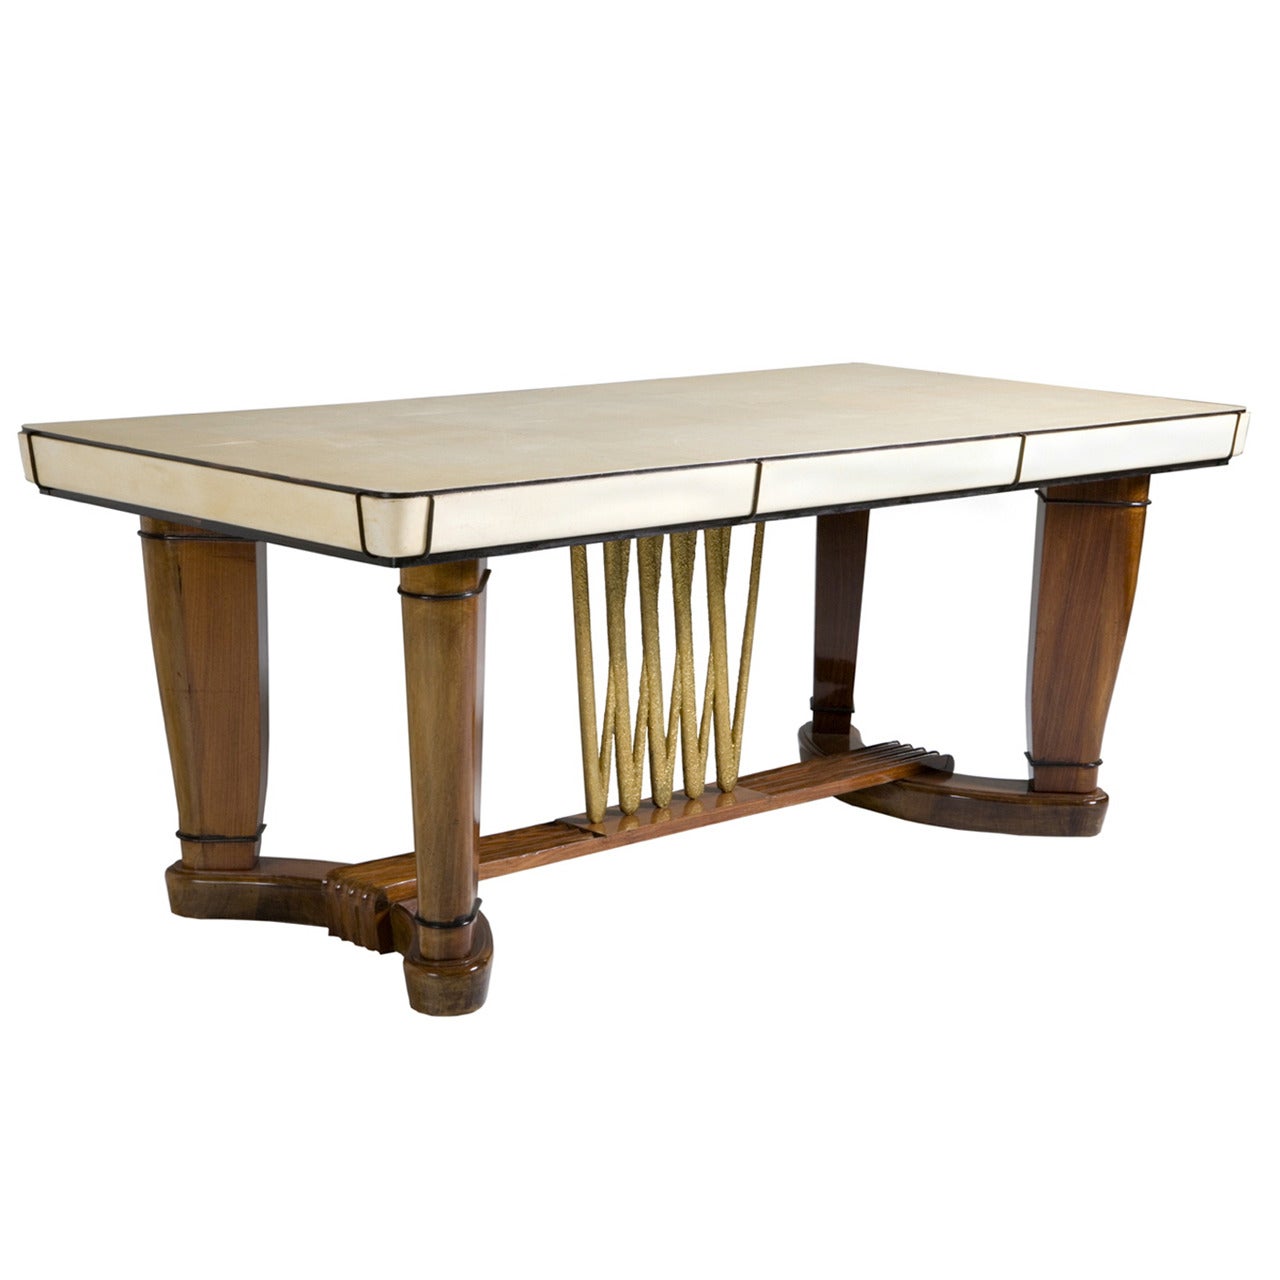 Italian Goat Skin Table with Walnut and Gilt Accents For Sale